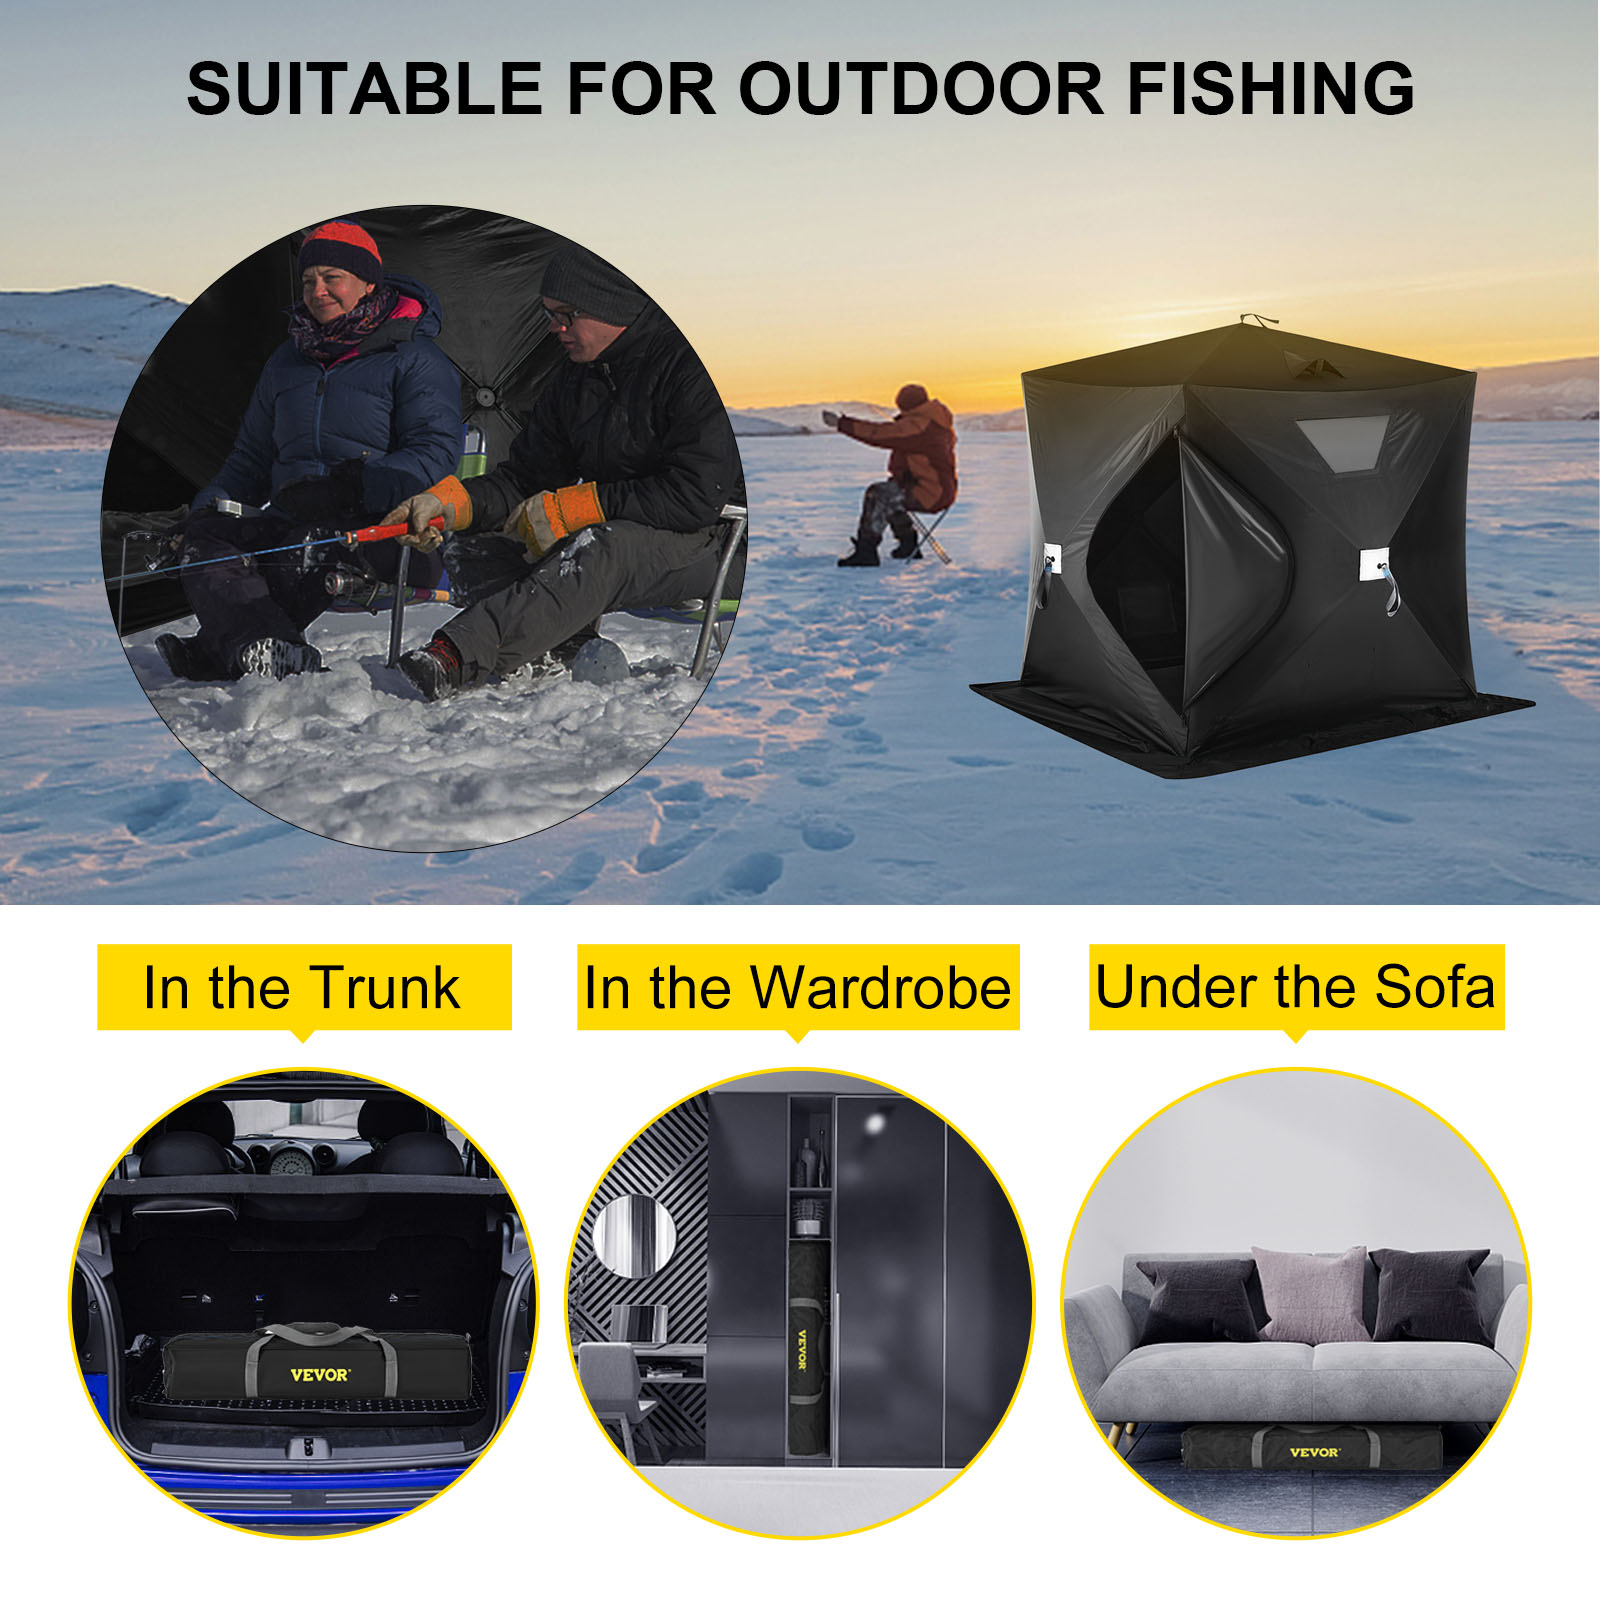 VEVOR 2-3 Person Ice Fishing Shelter, Pop-Up Portable Insulated